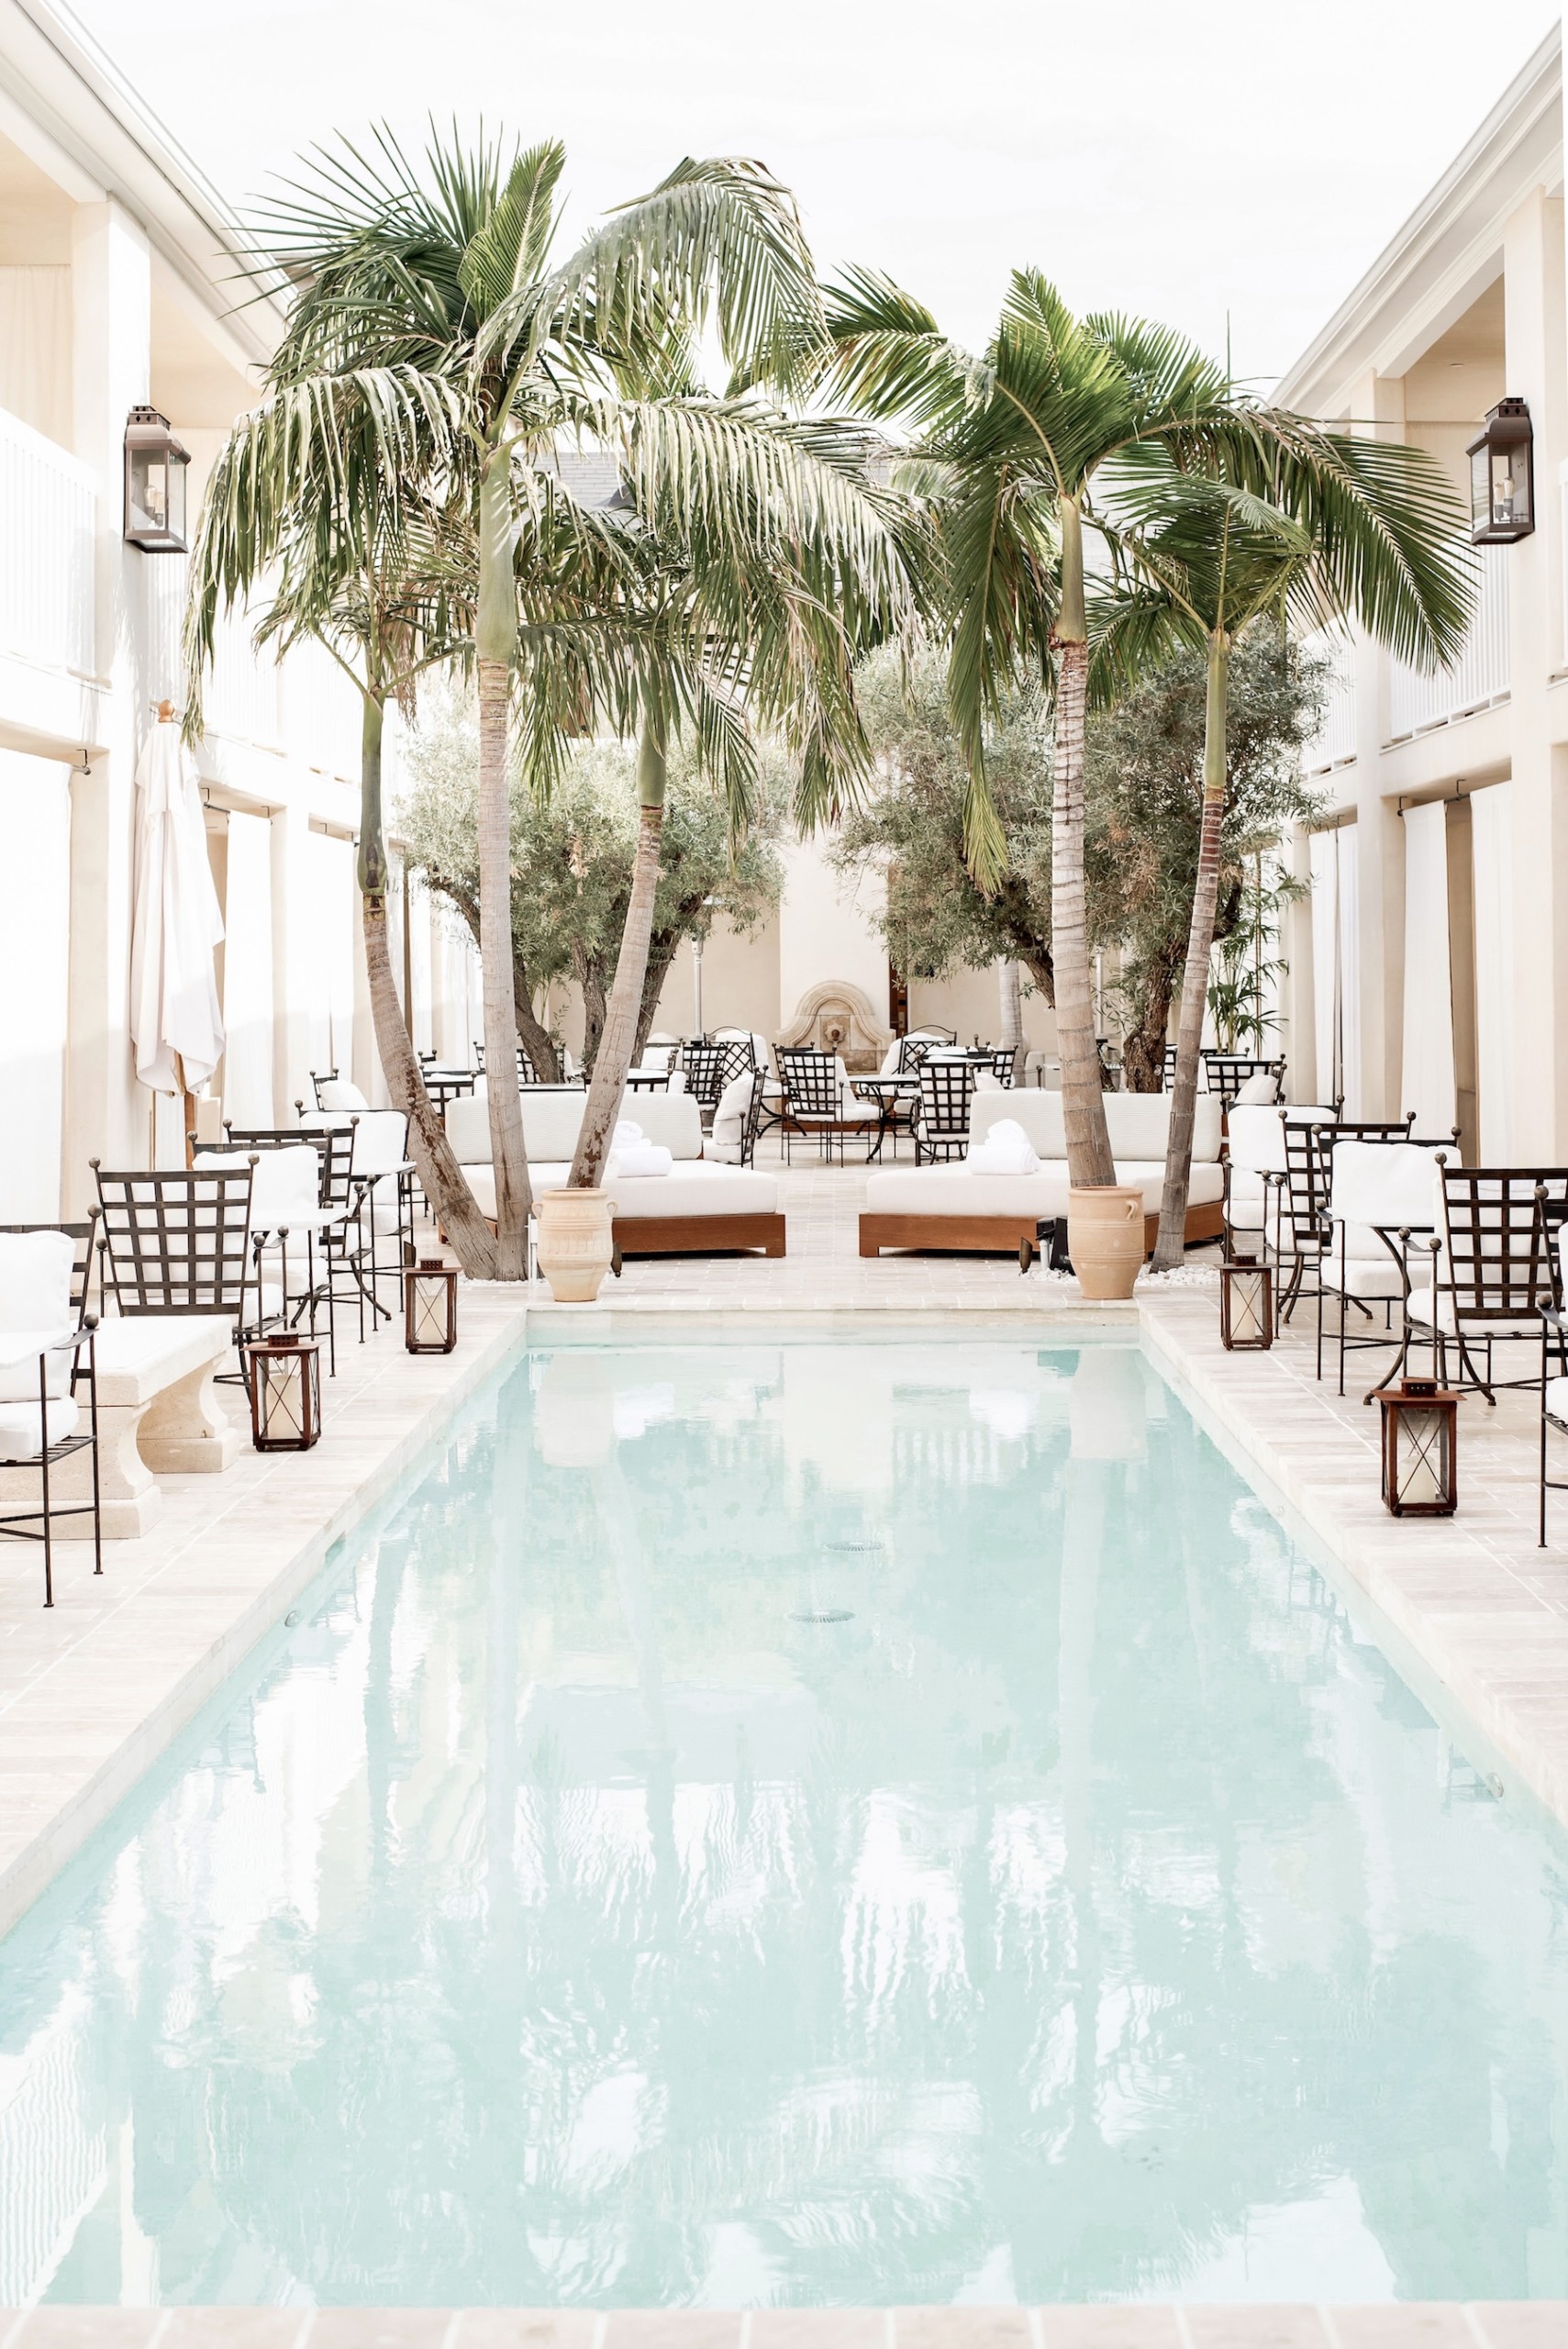 The courtyard of the Cara Hotel. Photography by Maura Grace.